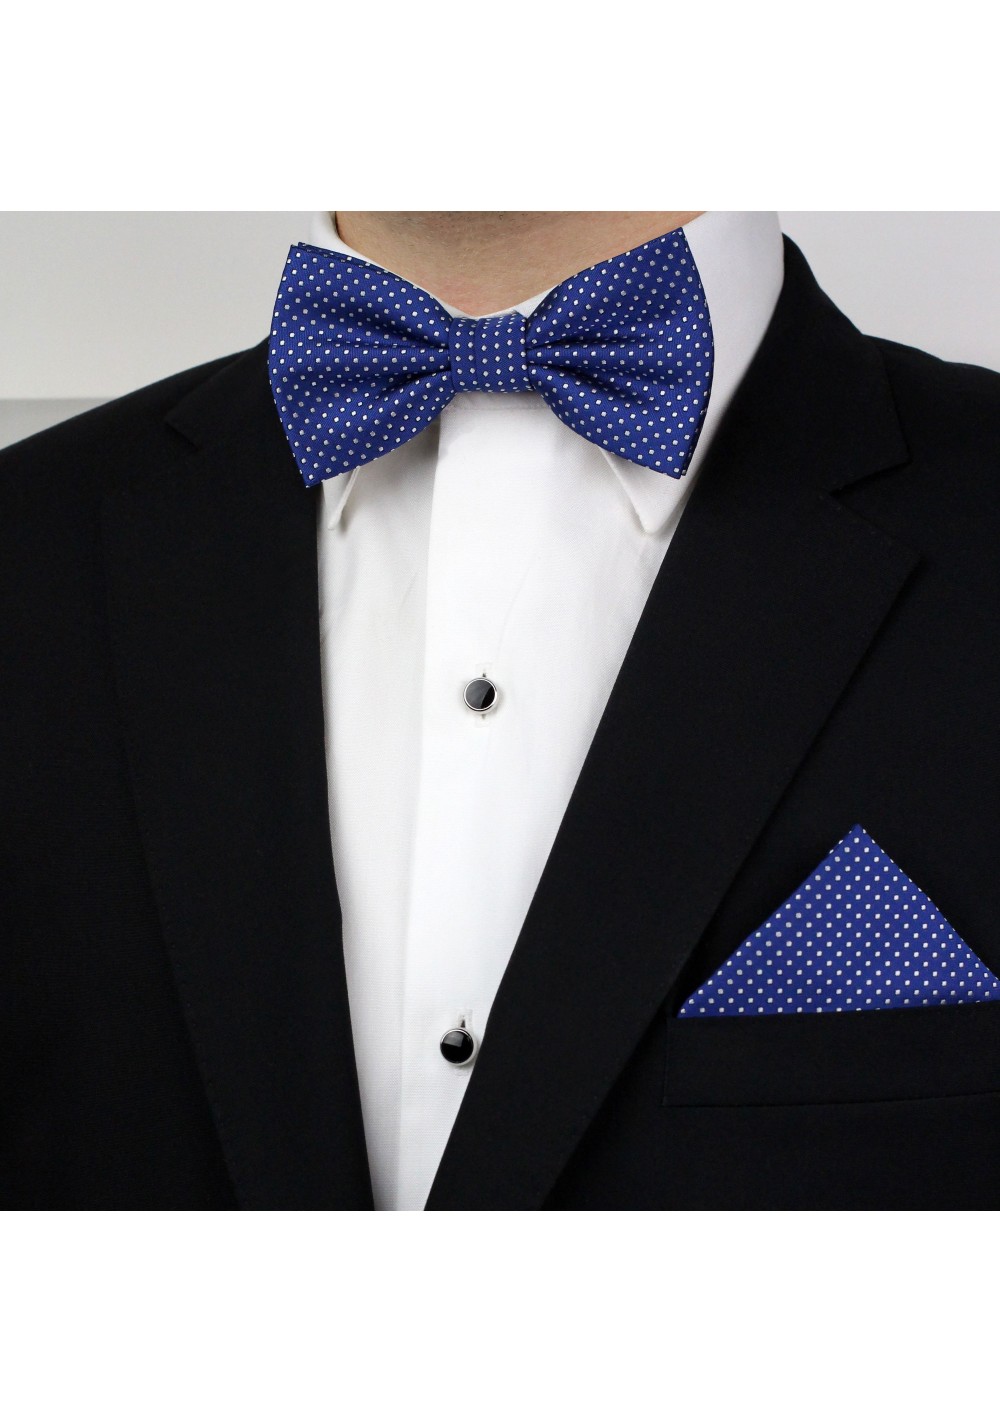 Bowtie Hanky Set in Sapphire Blue | Mens Bow Tie with Pin Dots in ...